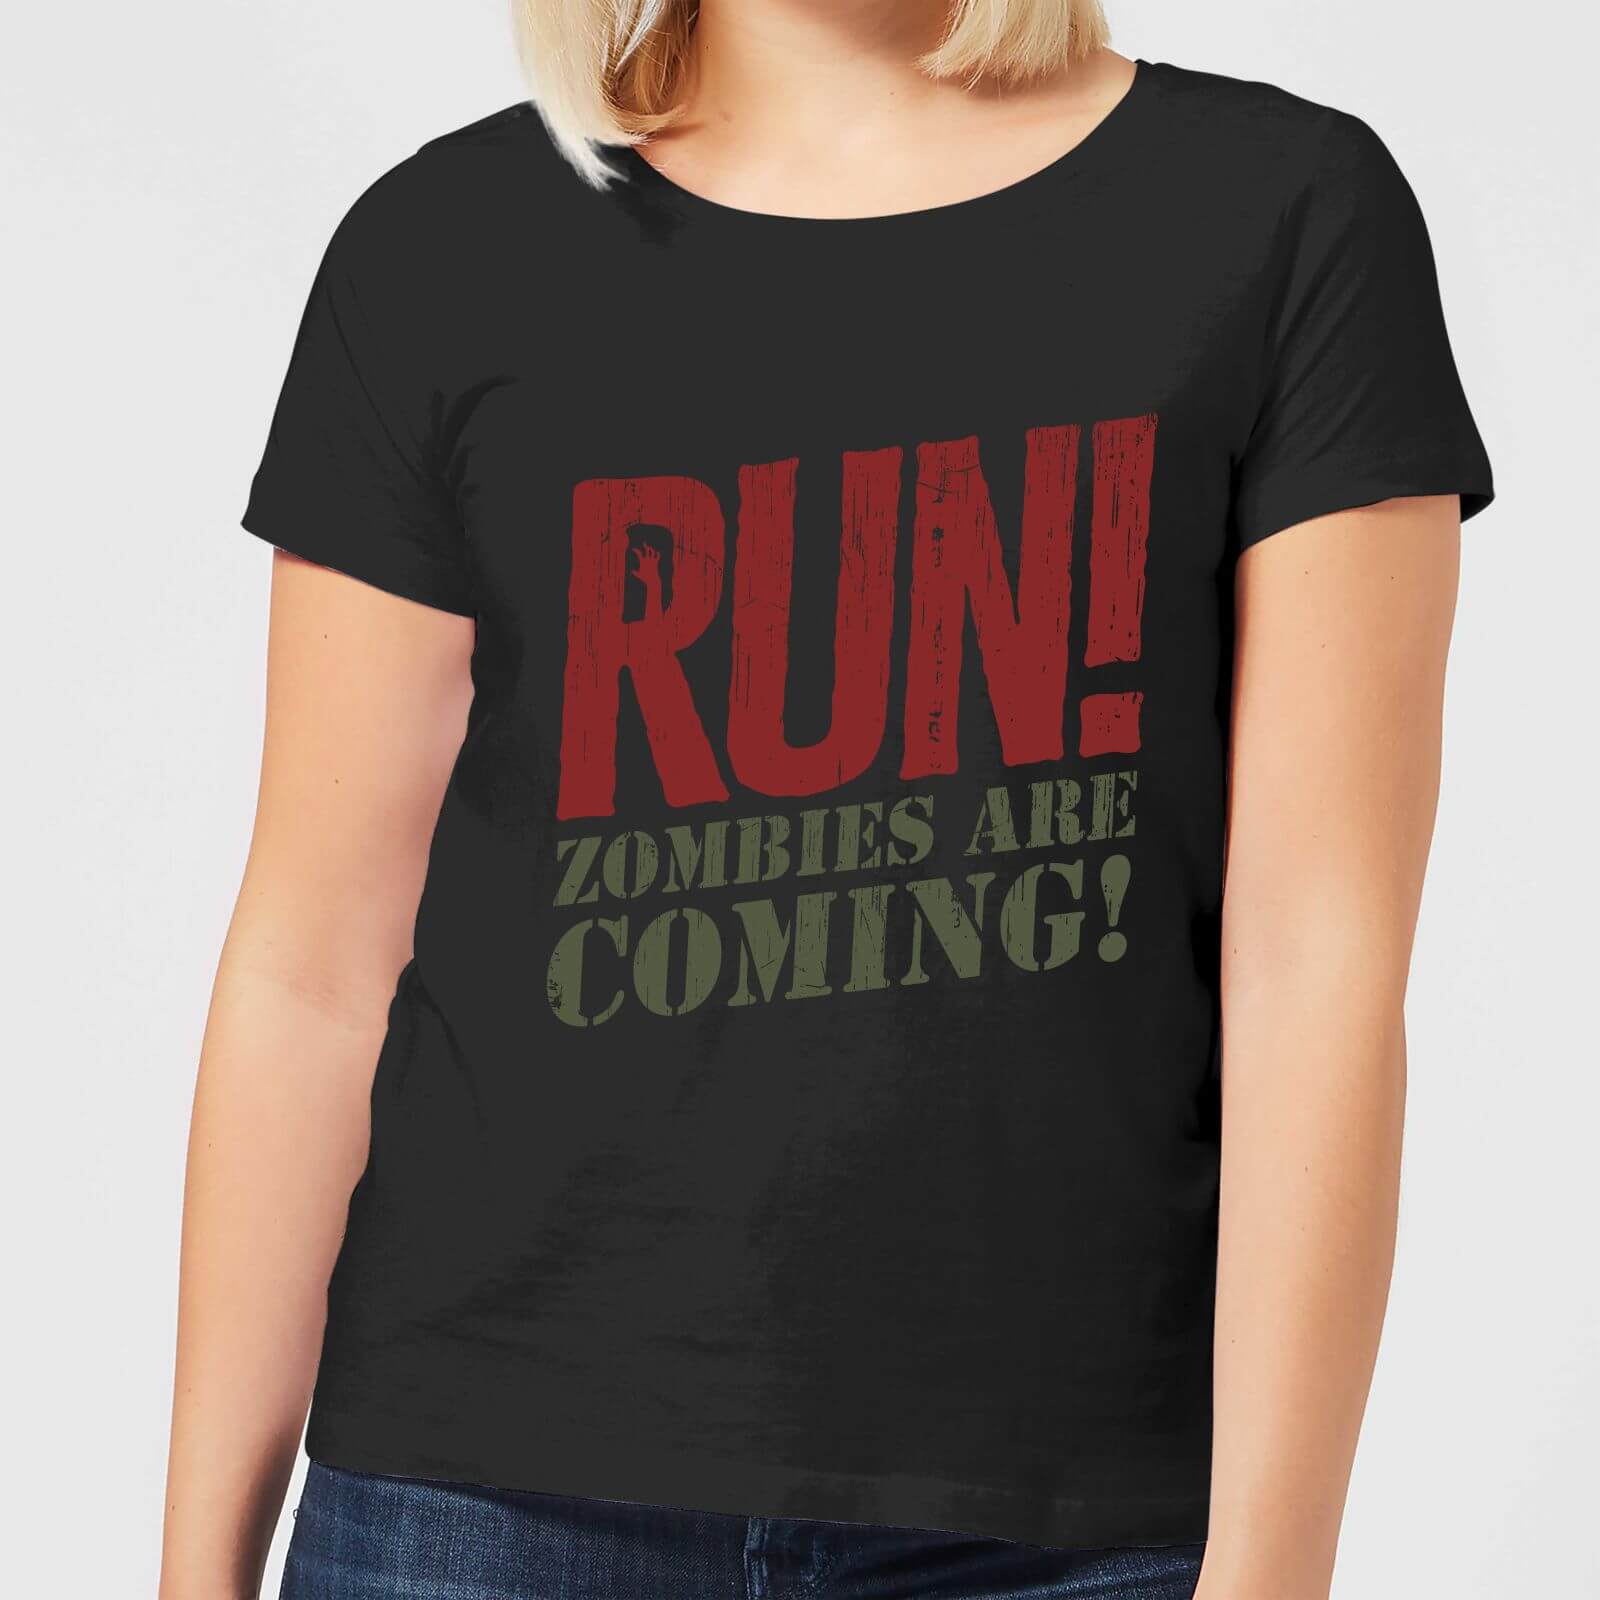 By IWOOT RUN! Zombies Are Coming! Women's T-Shirt - Black - 3XL - Black